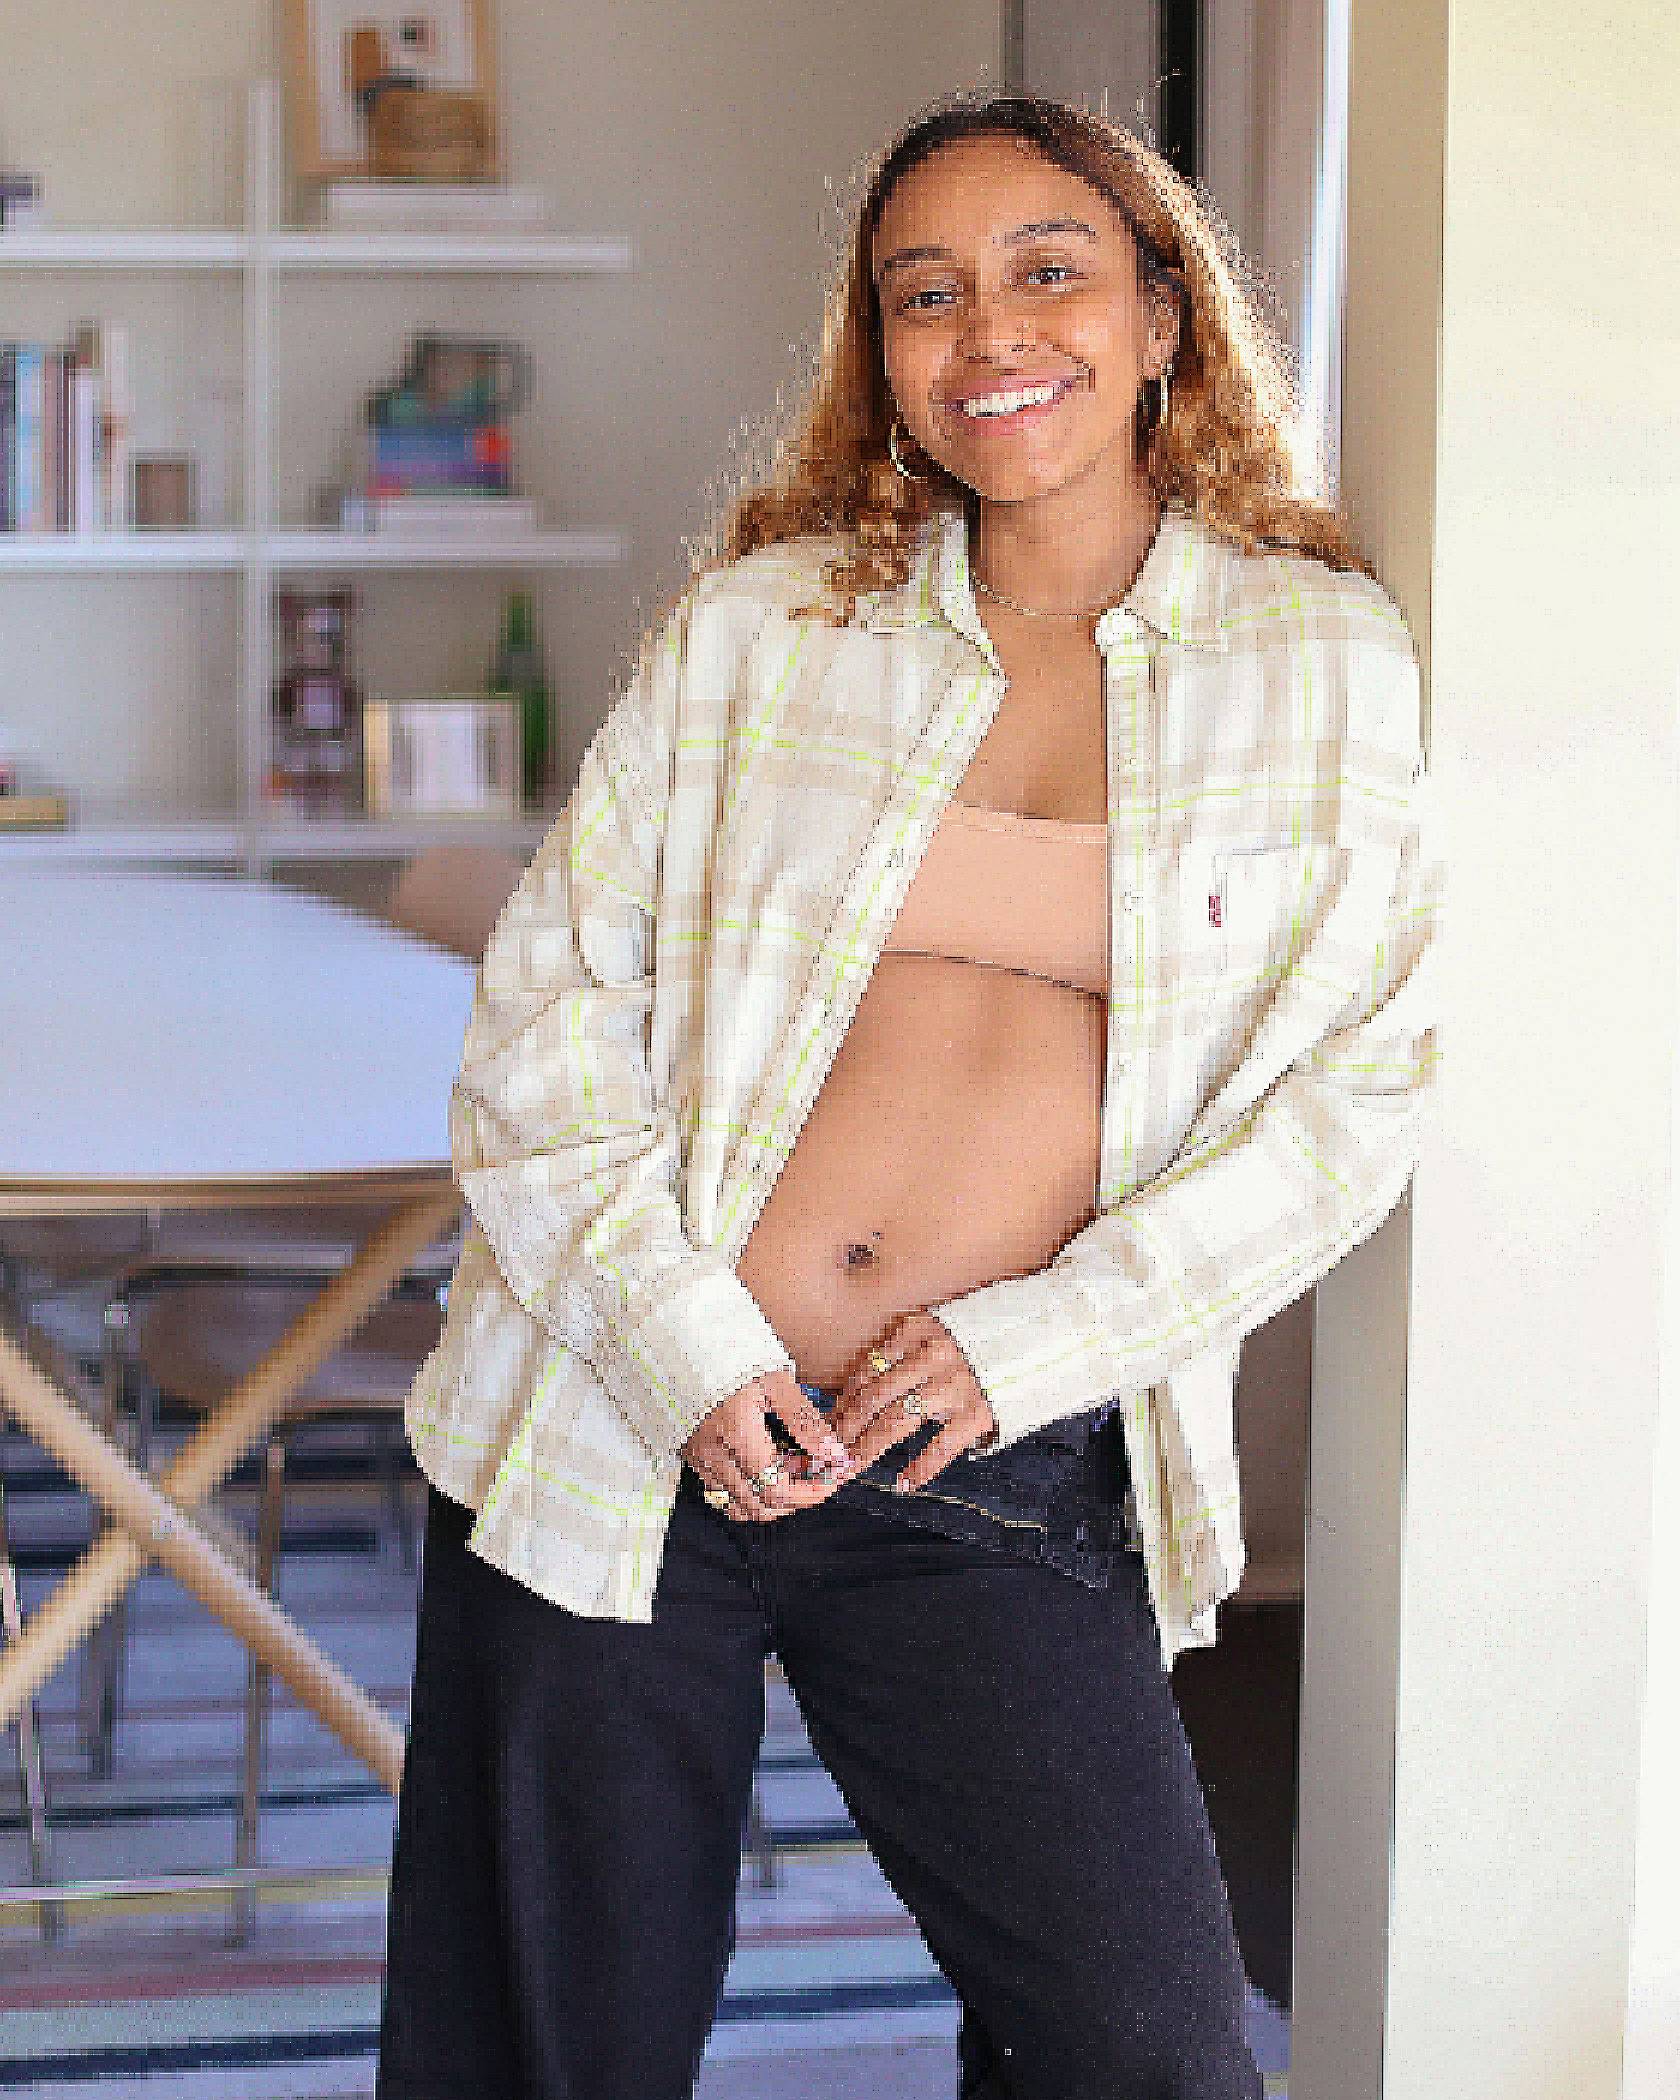 Portrait of Evelynn Escobar-Thomas standing in a doorway inside her home smiling. She is wearing a peach sports bra, a cream and yellow flannel, and black jeans.